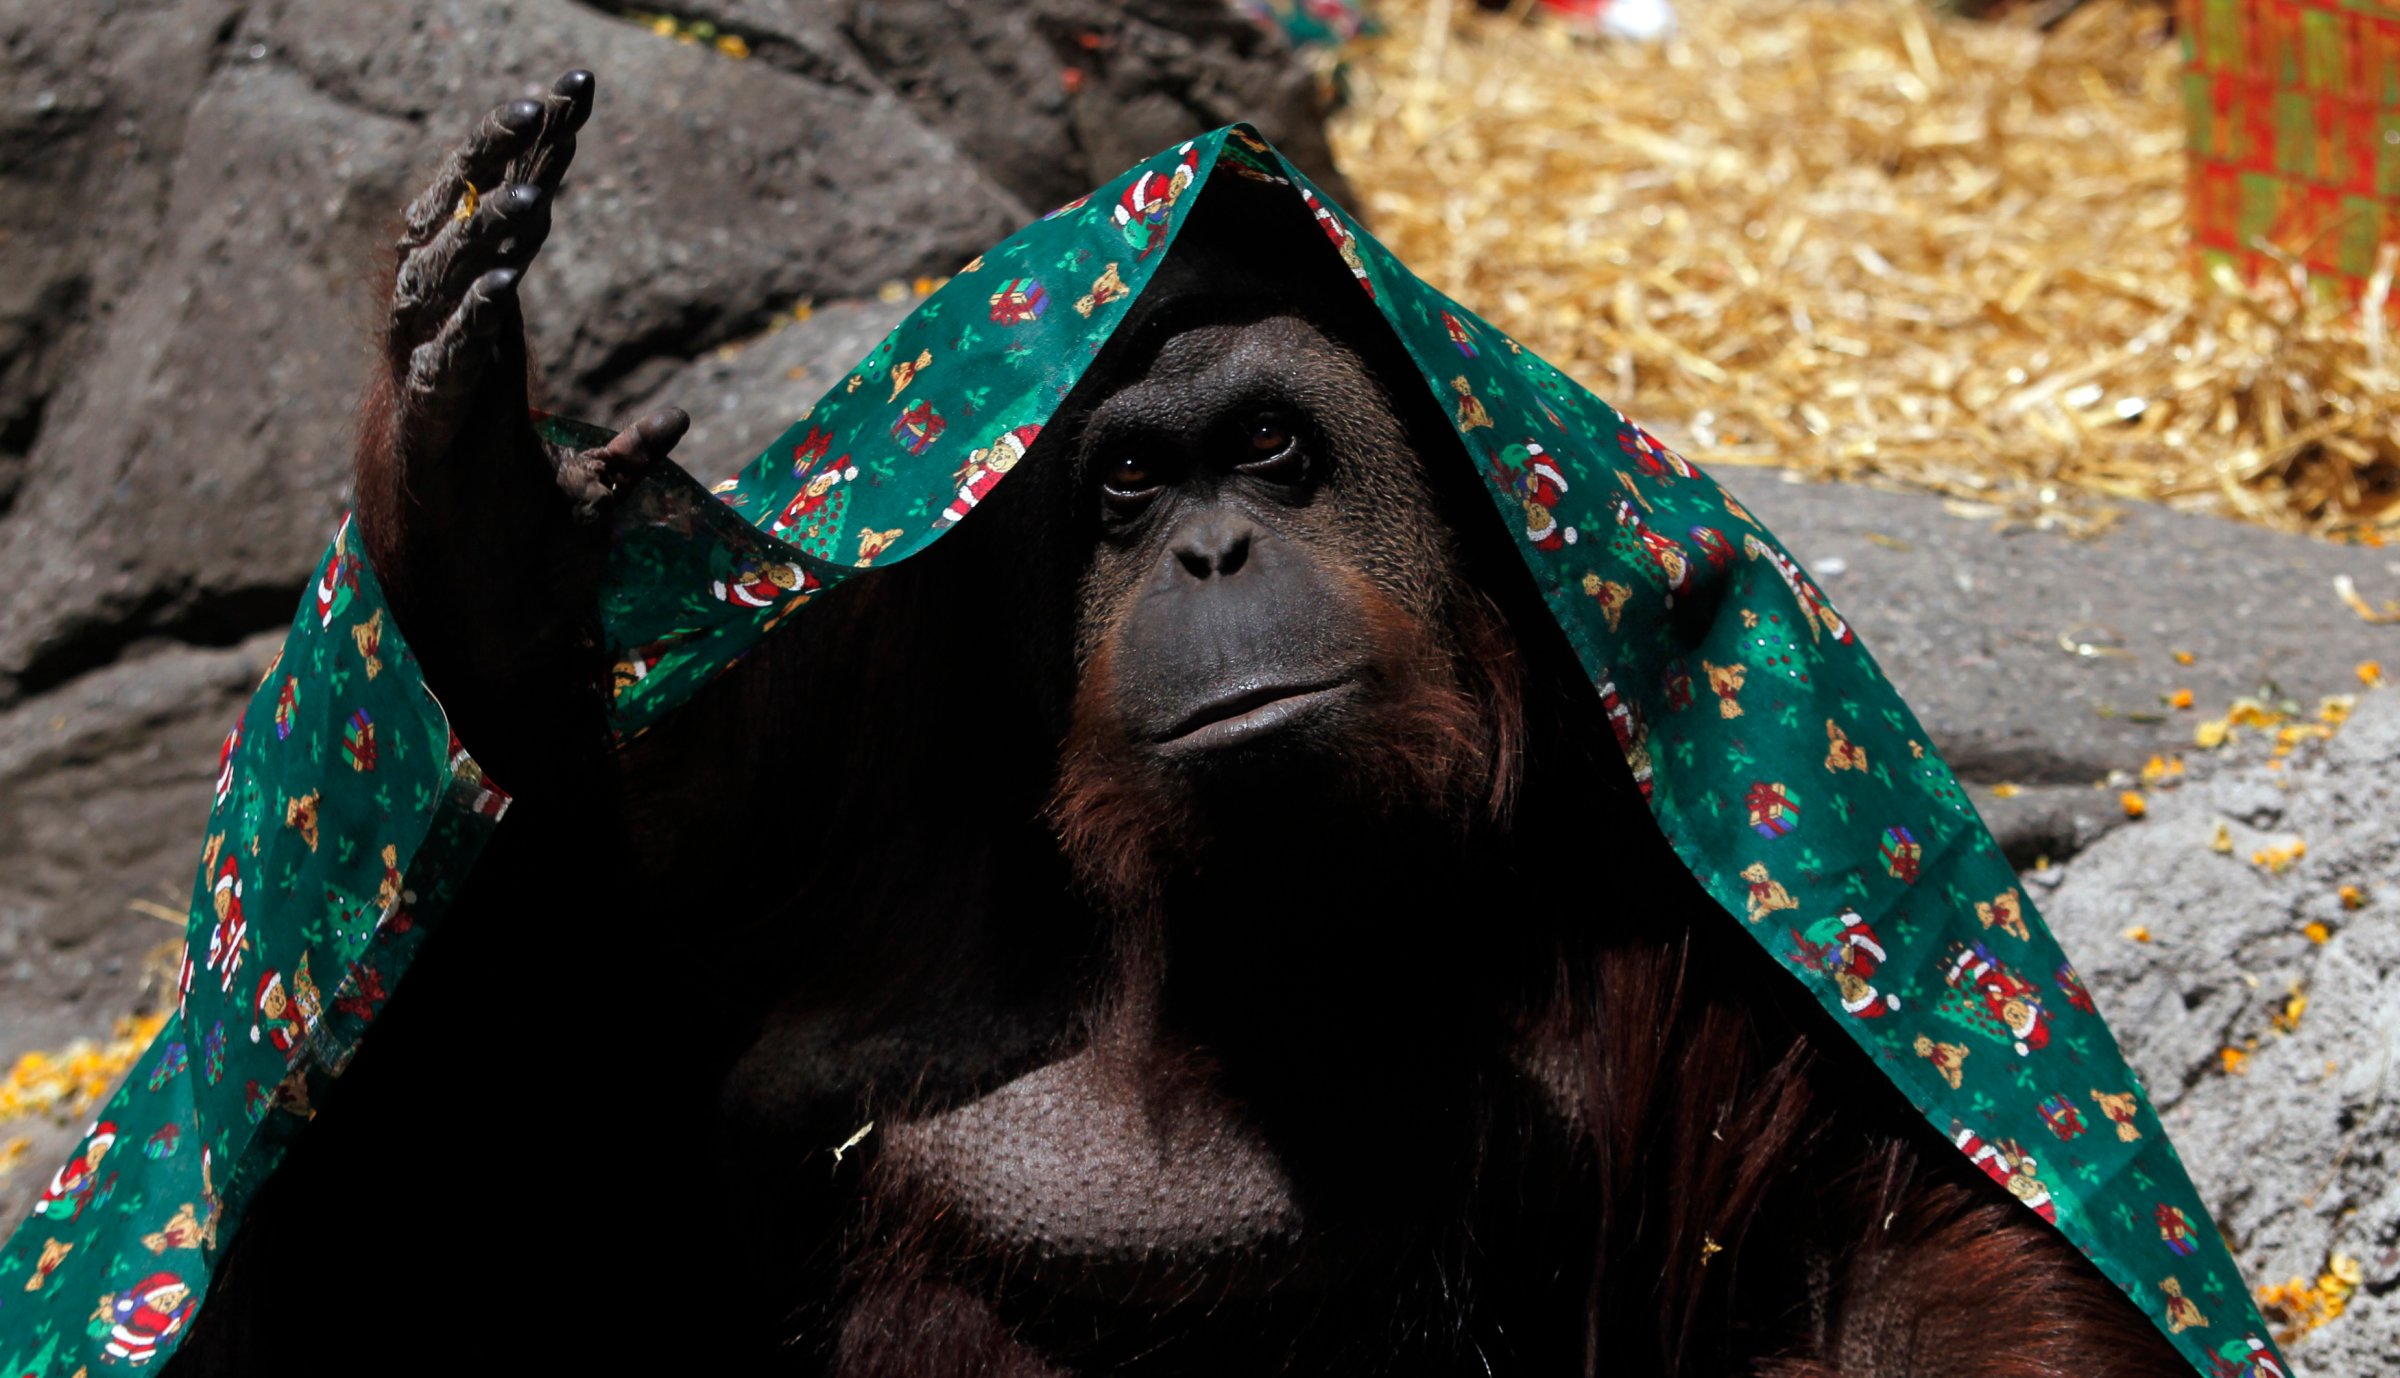 An orangutan named Sandra, covered with a blanket, gestures inside its cage at Buenos Aires' Zoo